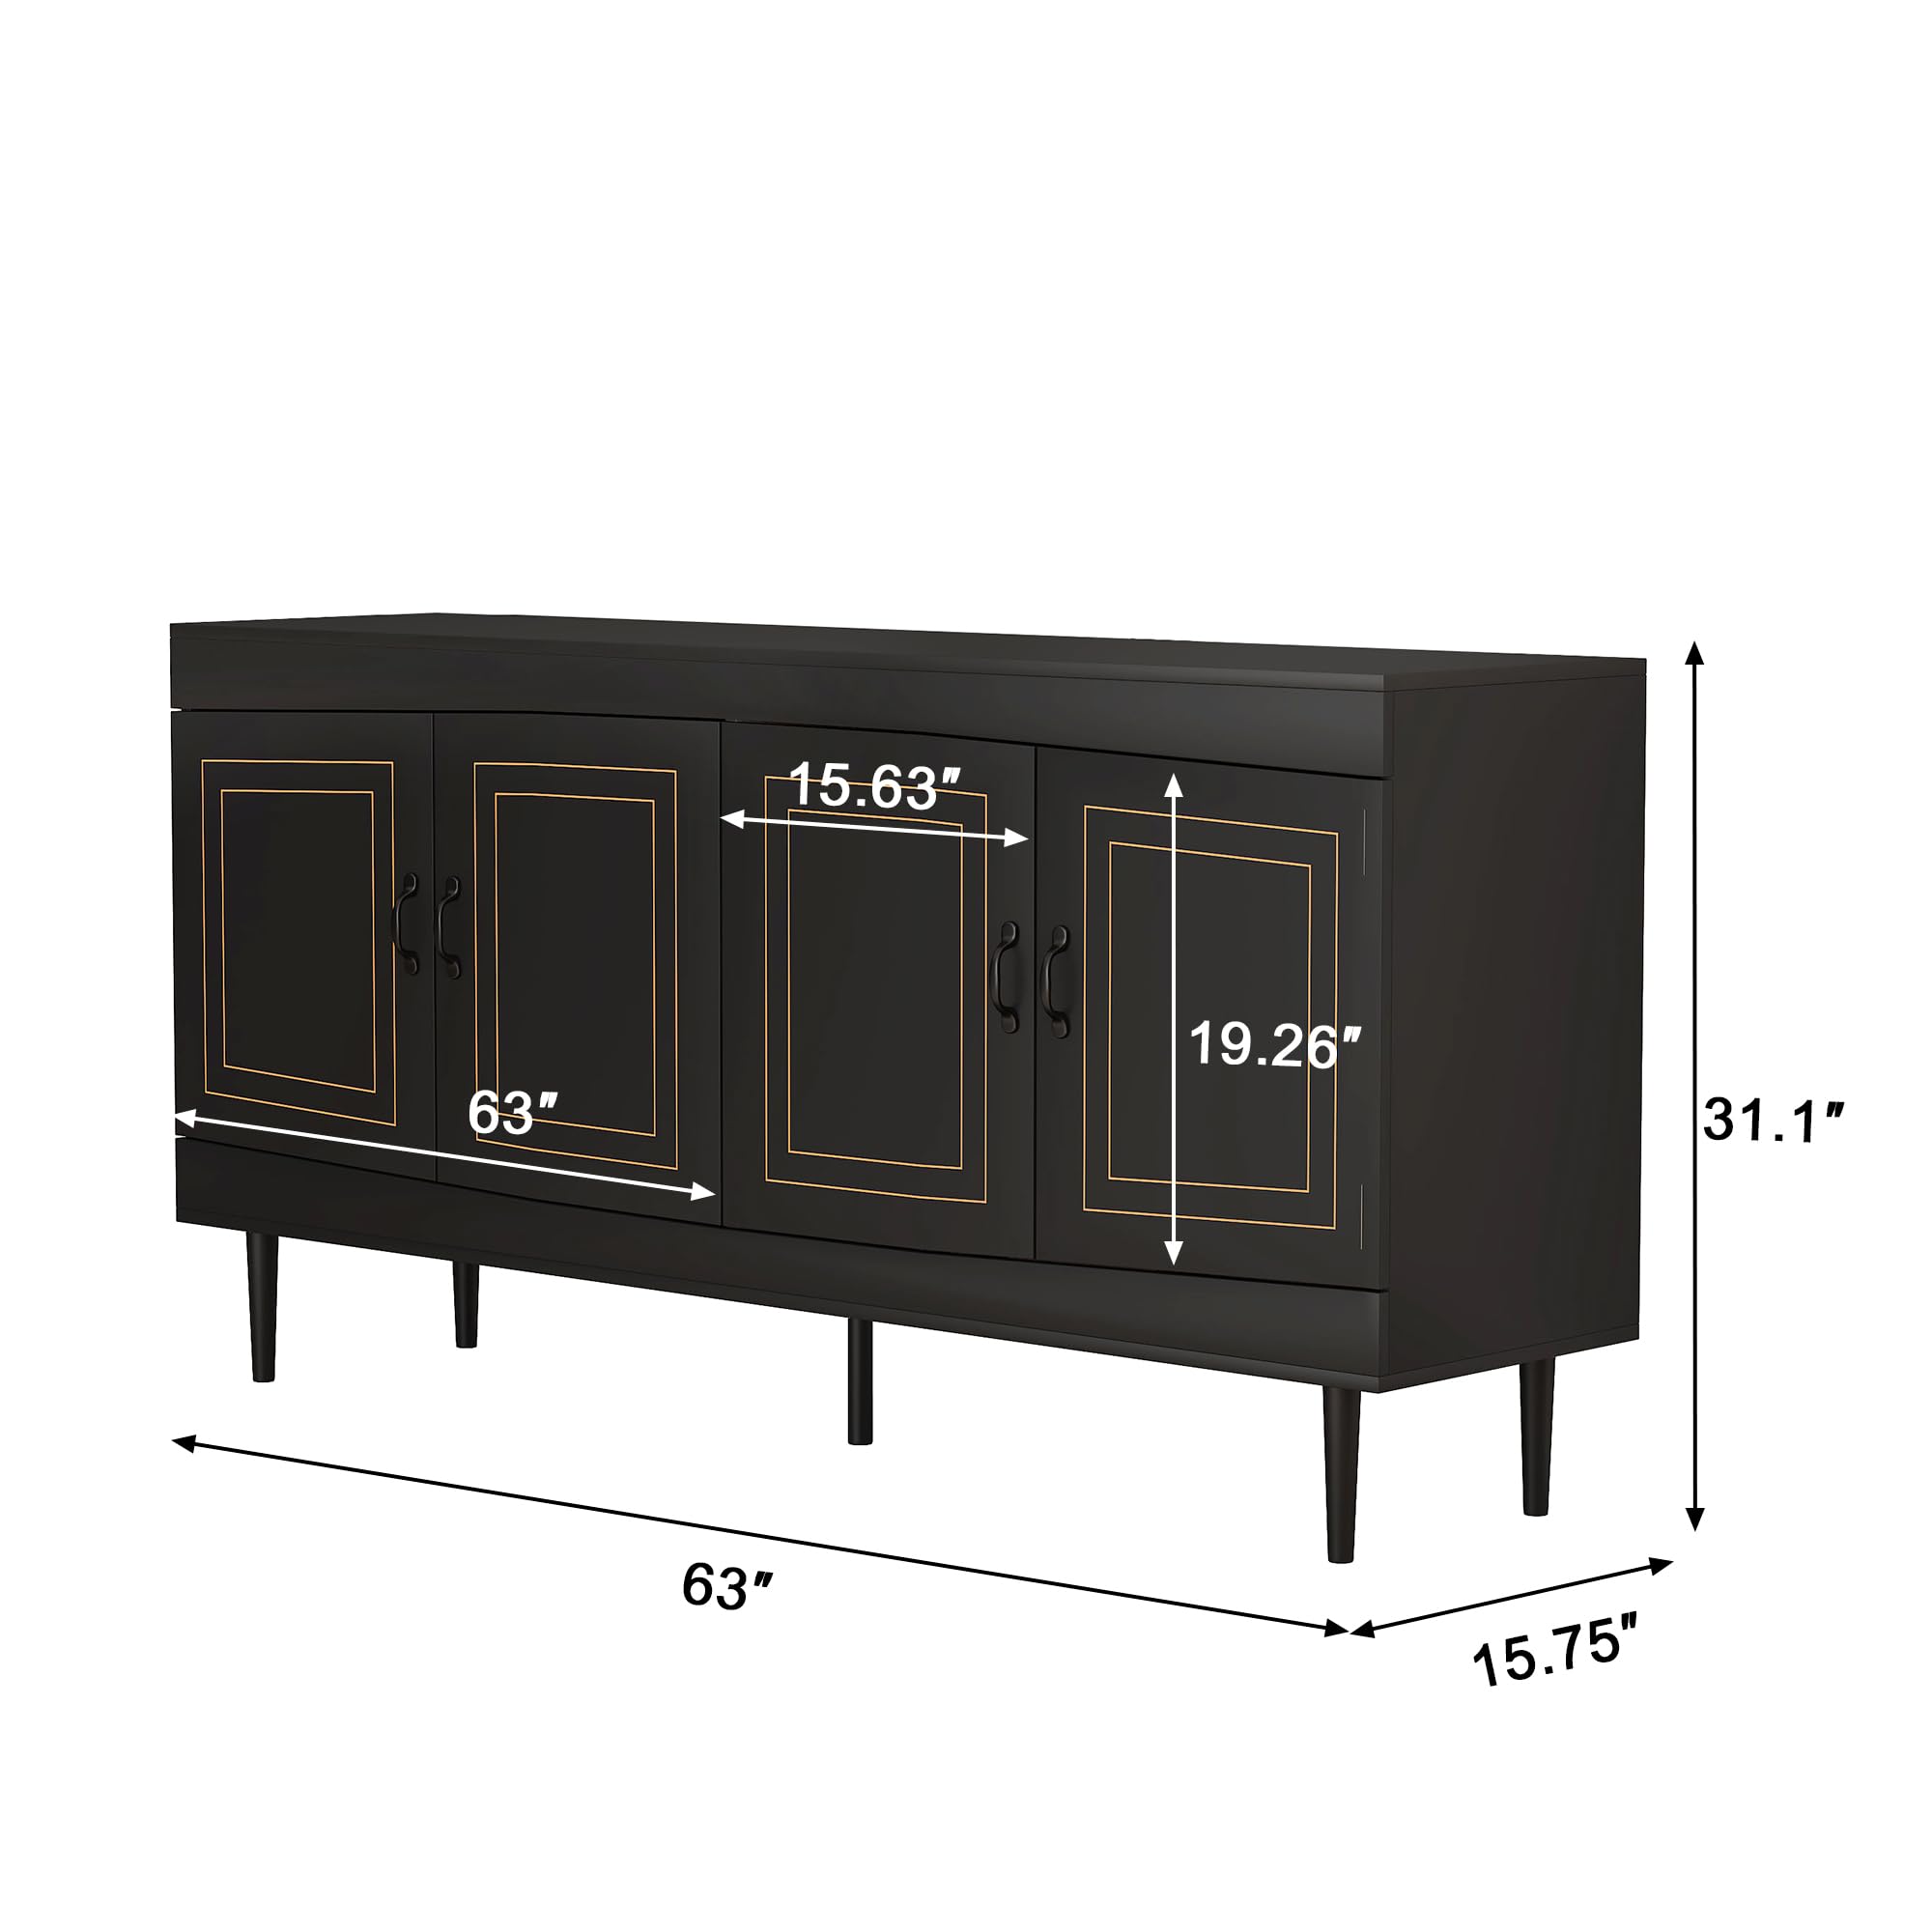 Sideboard Storage Cabinet, Kitchen Buffet Cabinet Console Table